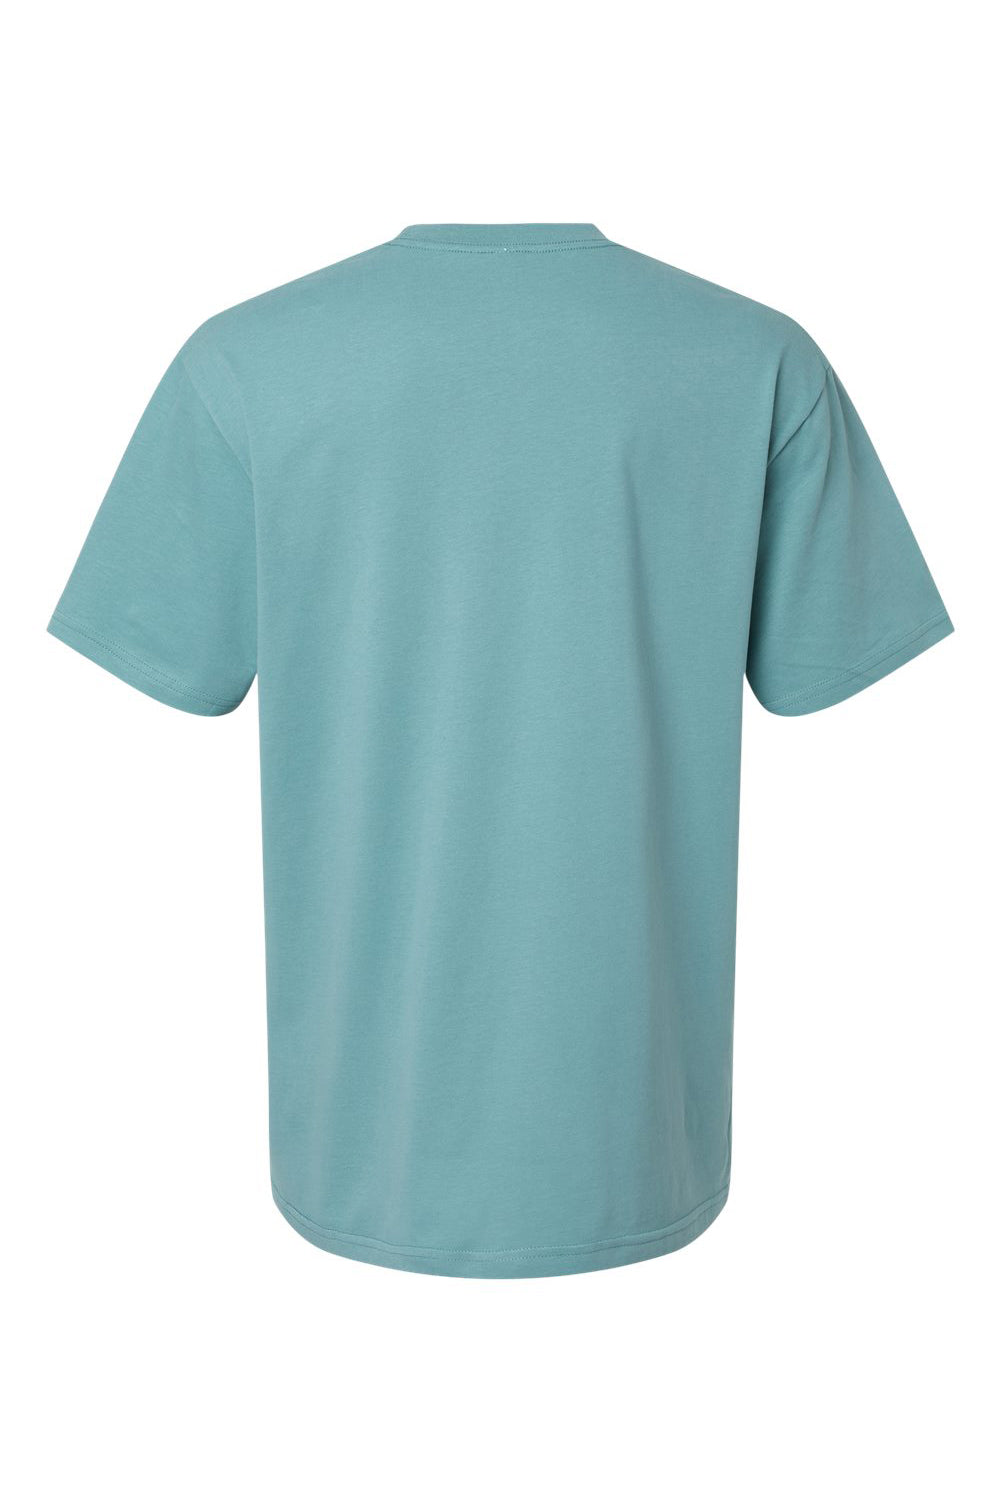 American Apparel 5389 Mens Sueded Cloud Short Sleeve Crewneck T-Shirt Sueded Arctic Flat Back